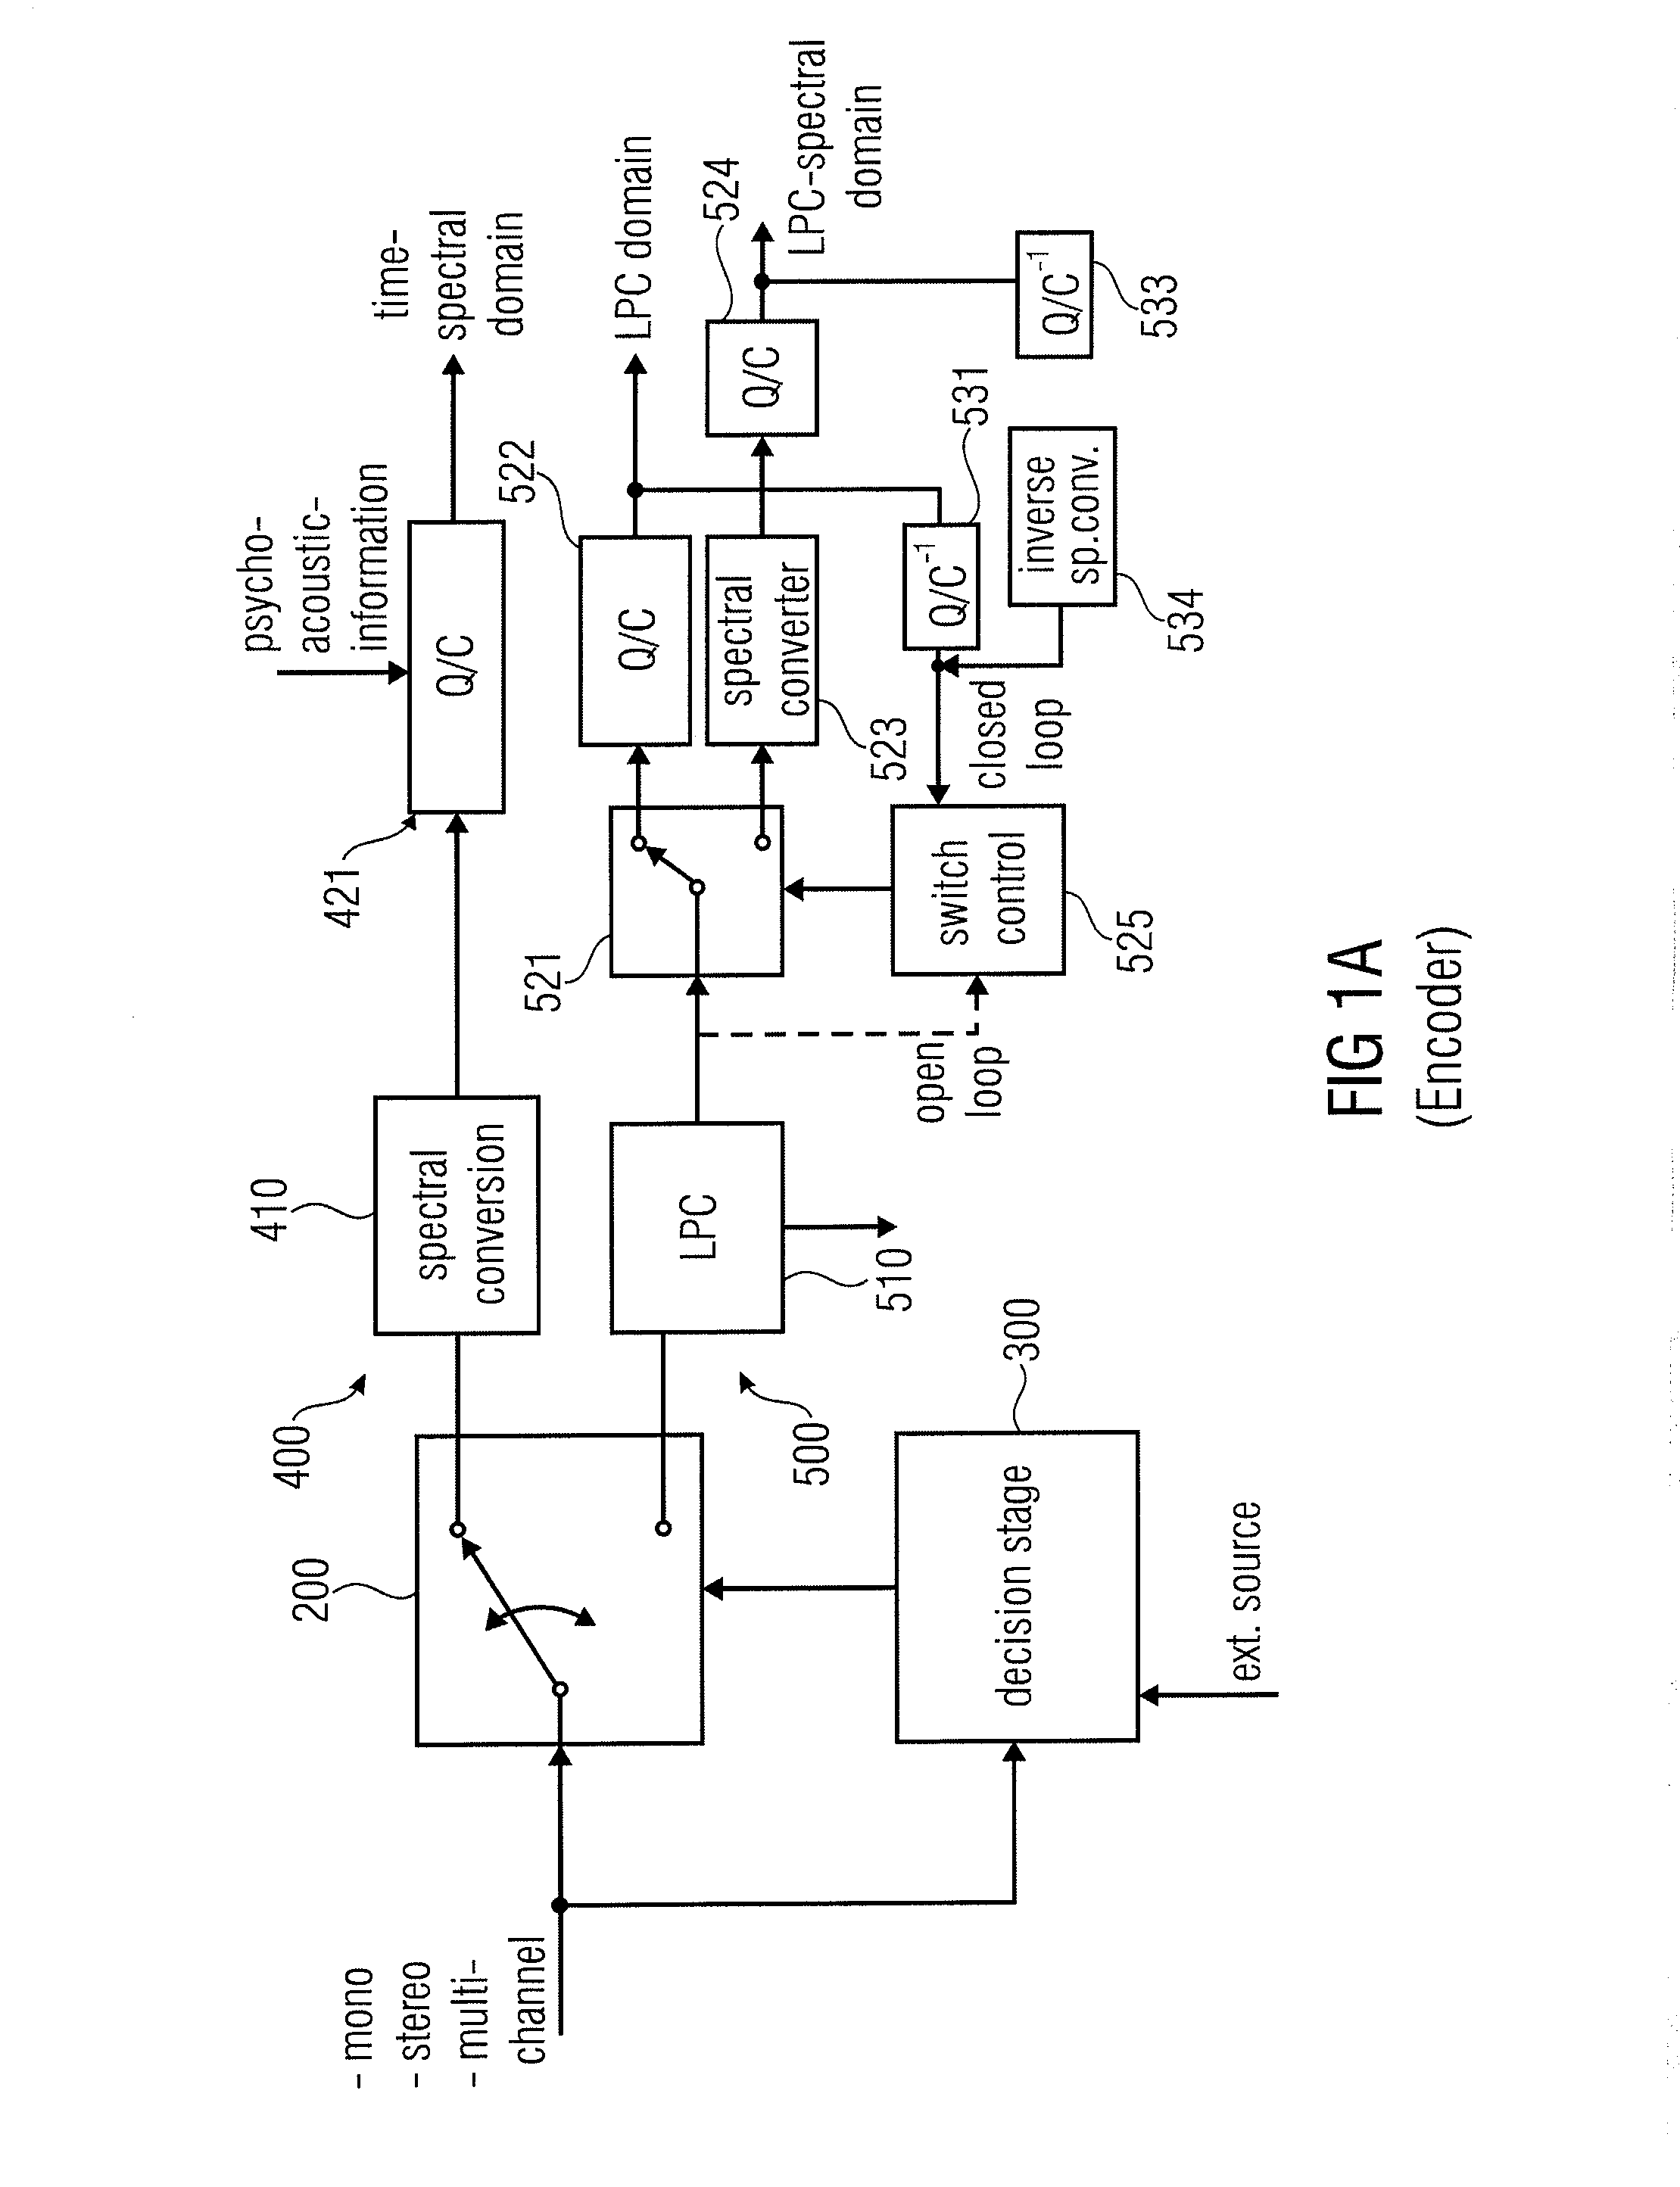 Low Bitrate Audio Encoding/Decoding Scheme Having Cascaded Switches